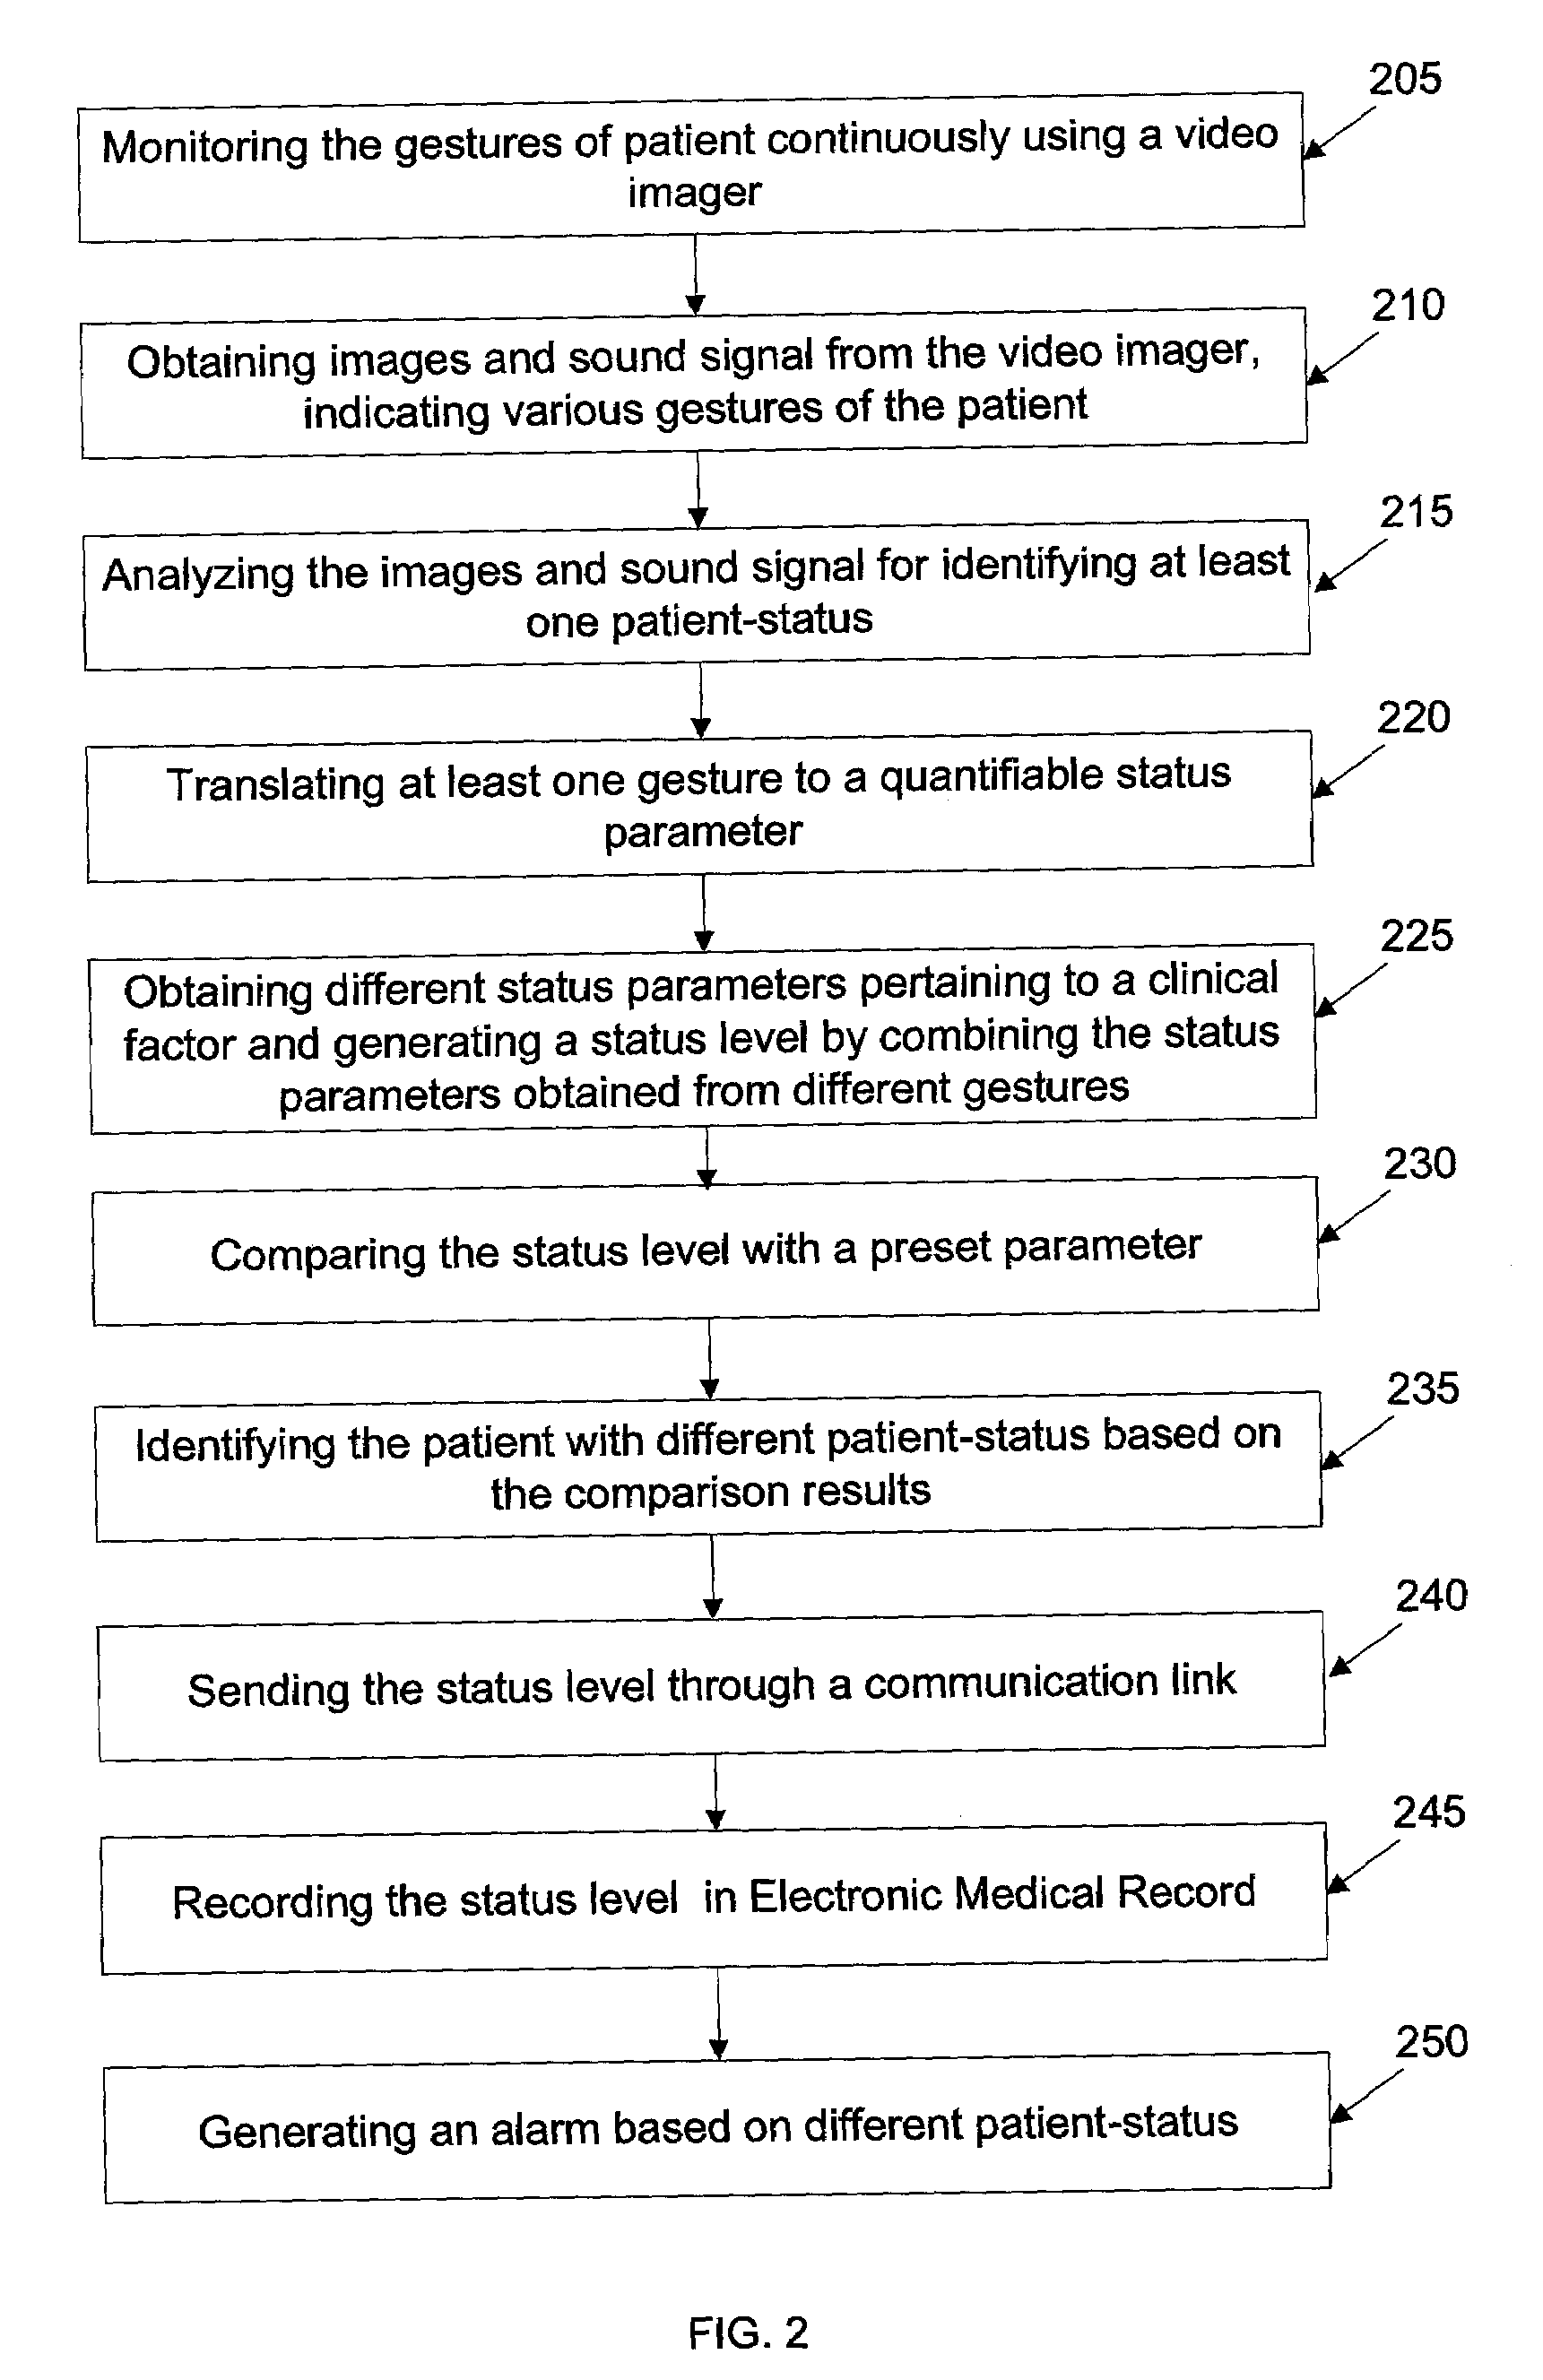 Method and system for recording patient-status